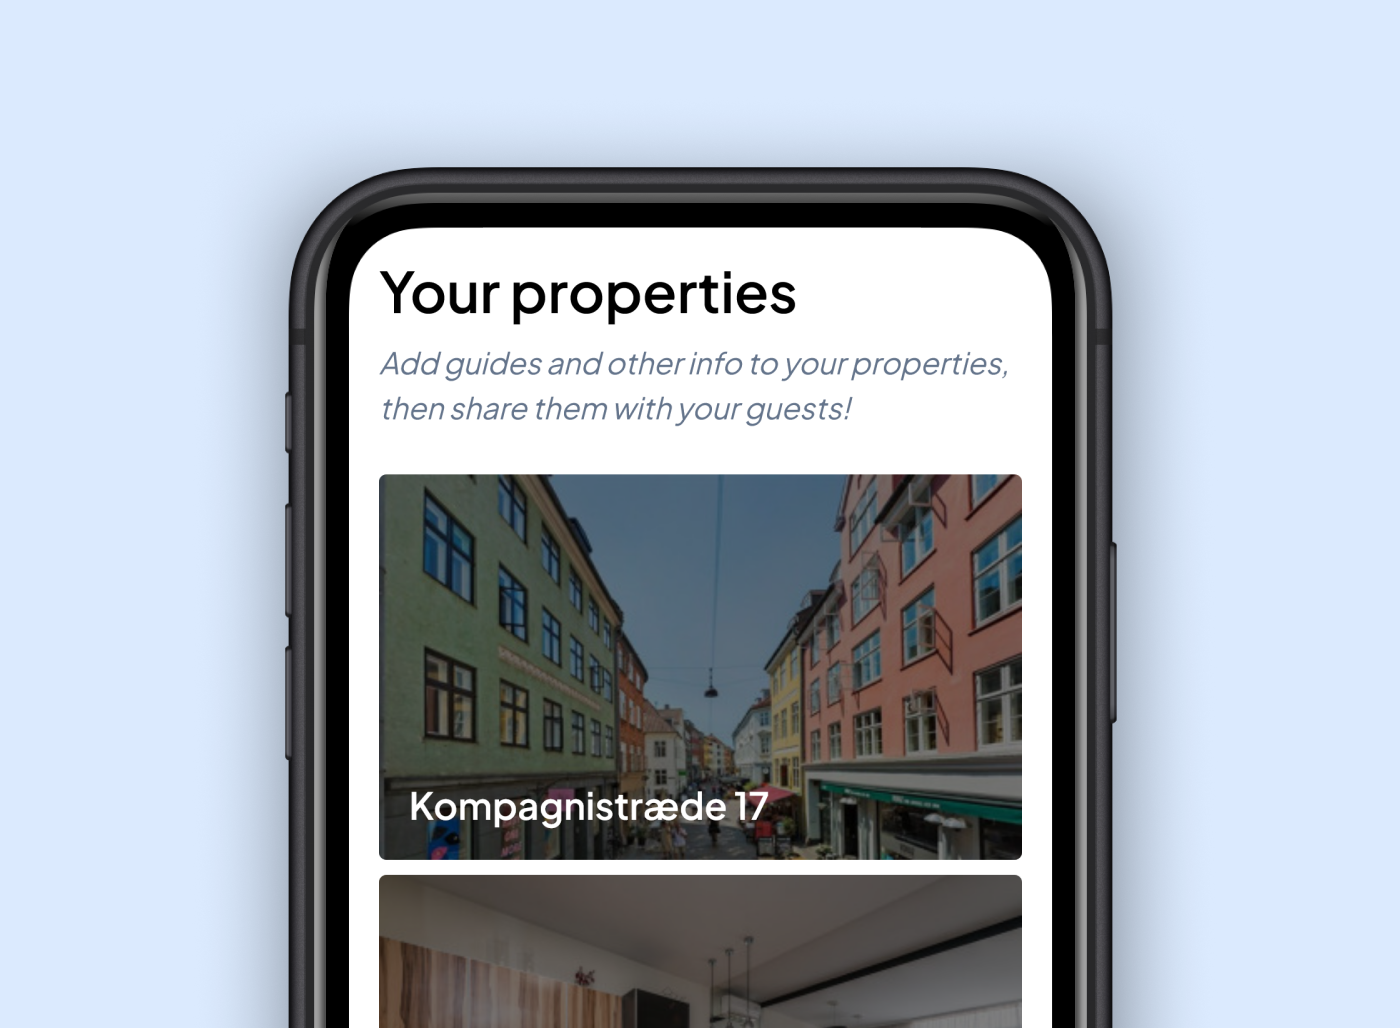 Listing of properties within the app